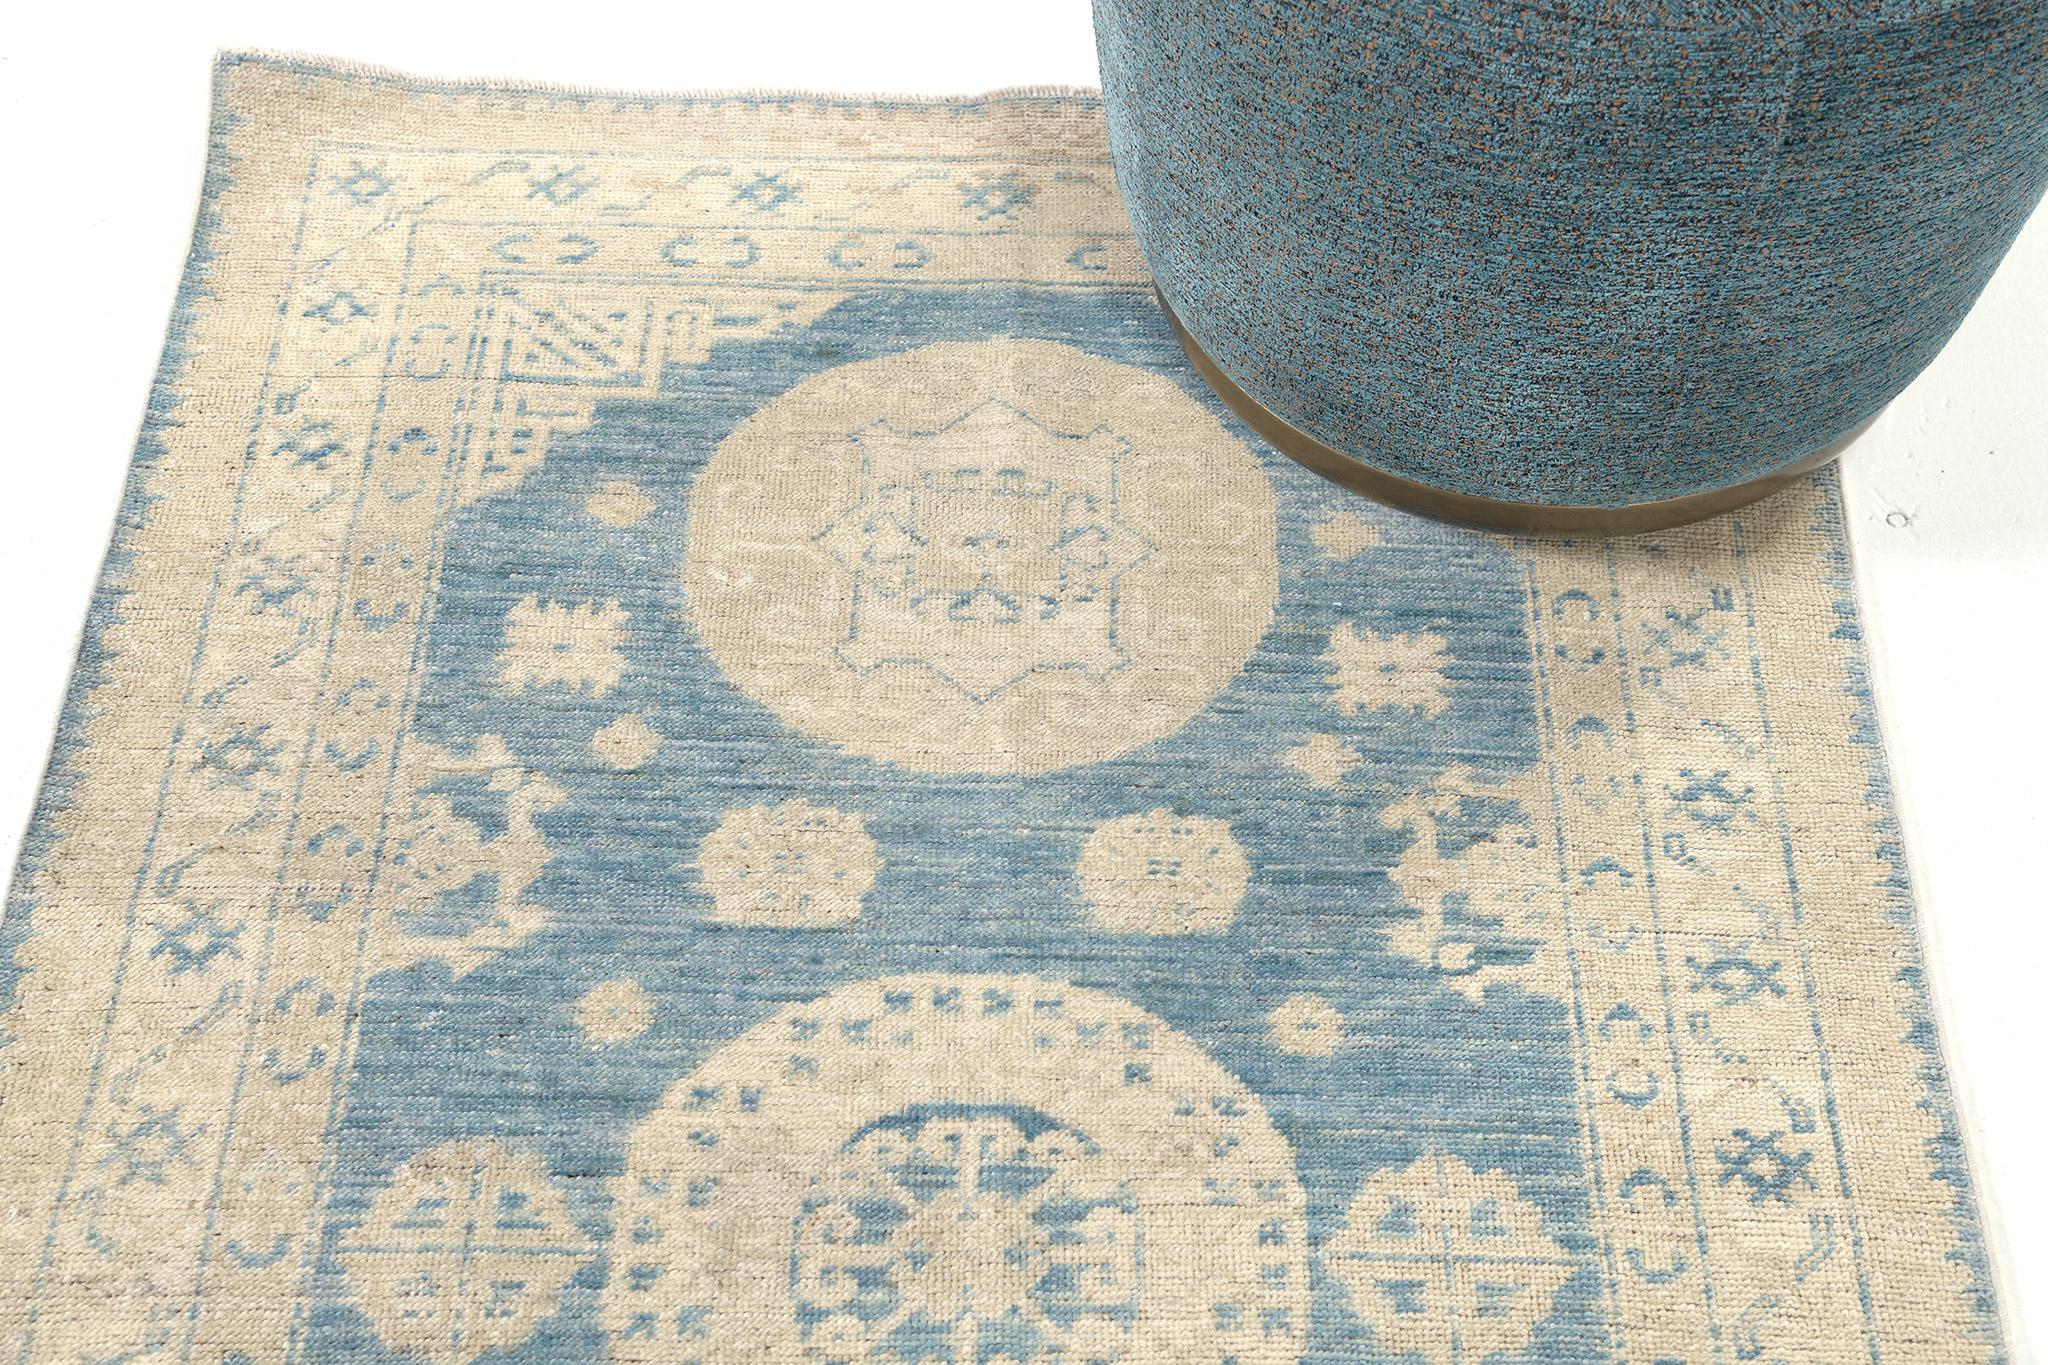 A majestic stylish Khotan revival rug that features a series of symbollical medallions spread across the cobalt field. Glorious ornate eye motifs enclose this sophisticated rug. An undeniably mesmerizing rug that brings incomparable elegance to